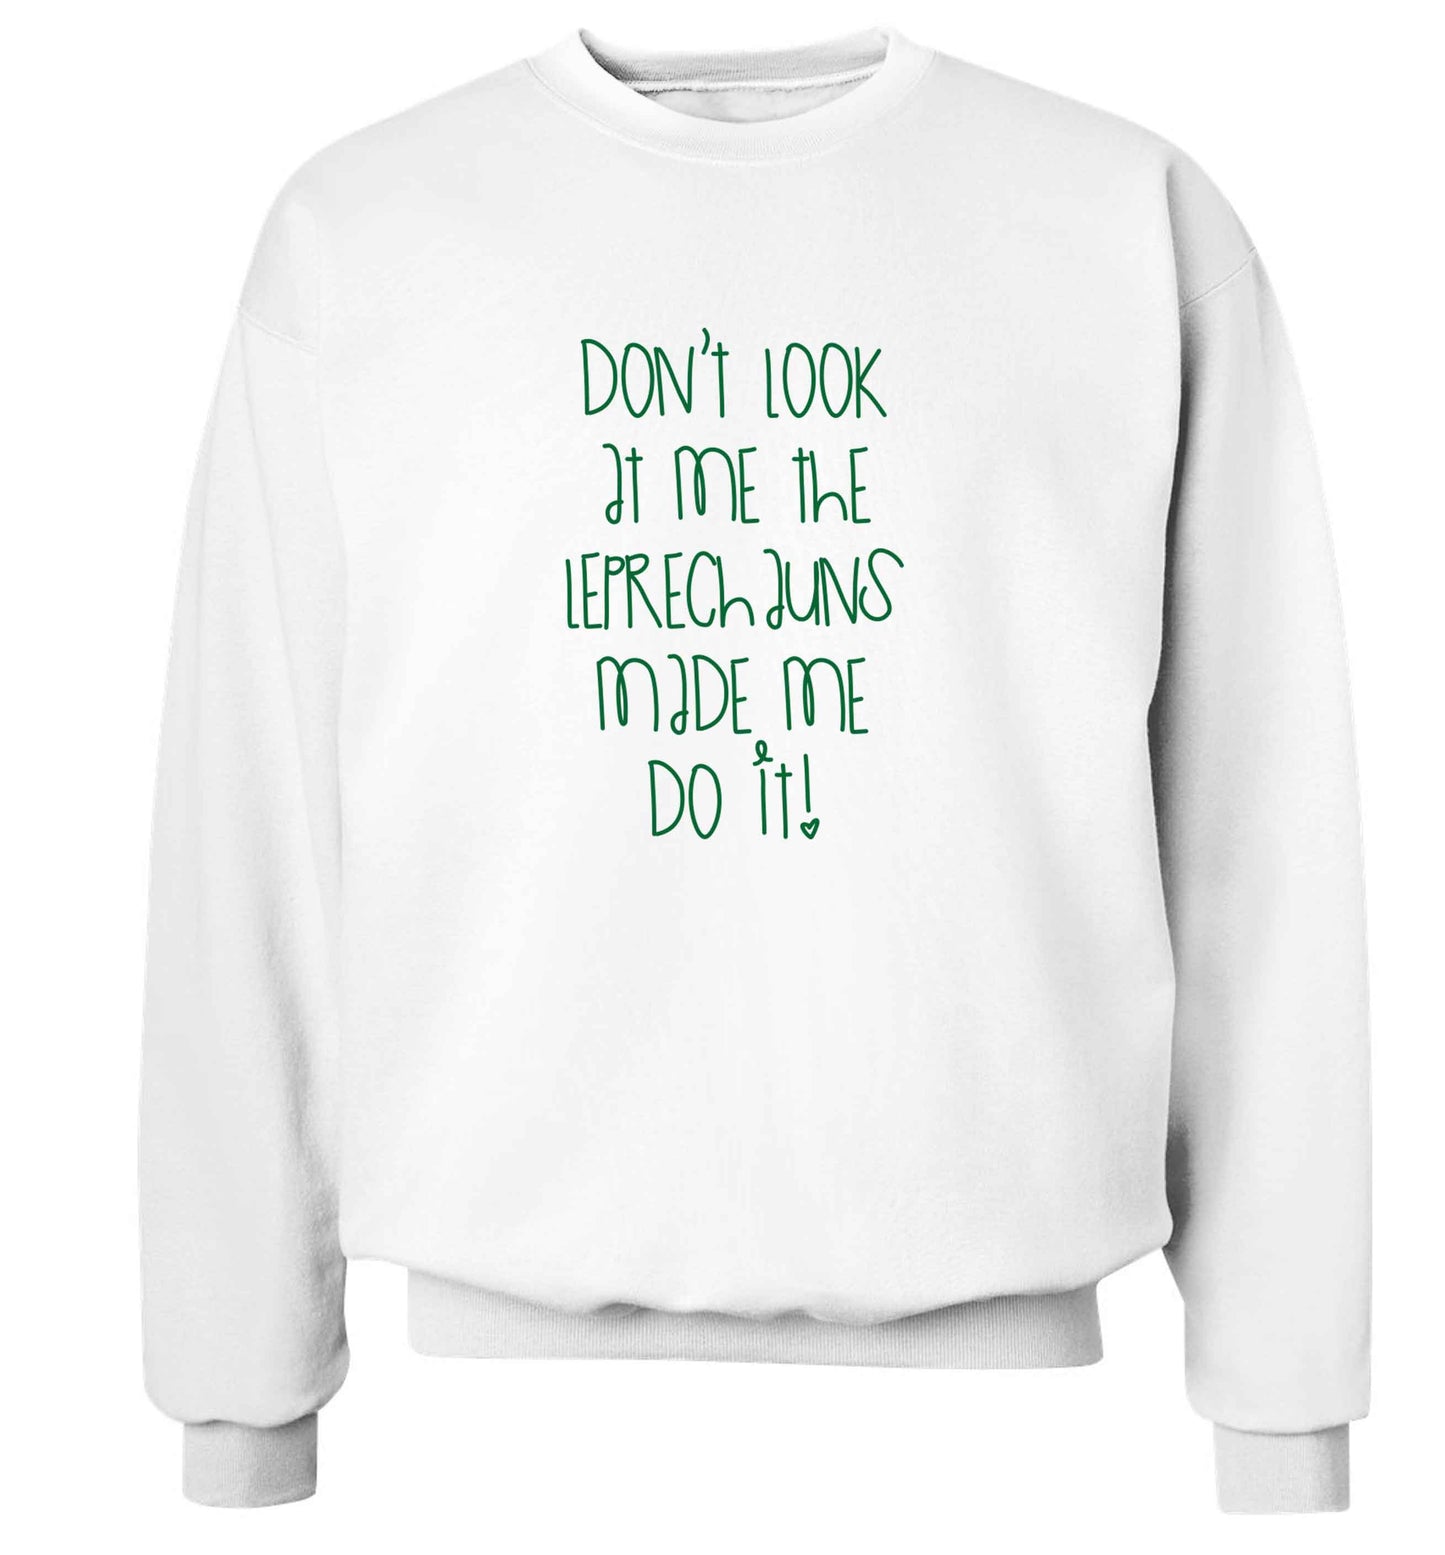 Don't look at me the leprechauns made me do it adult's unisex white sweater 2XL